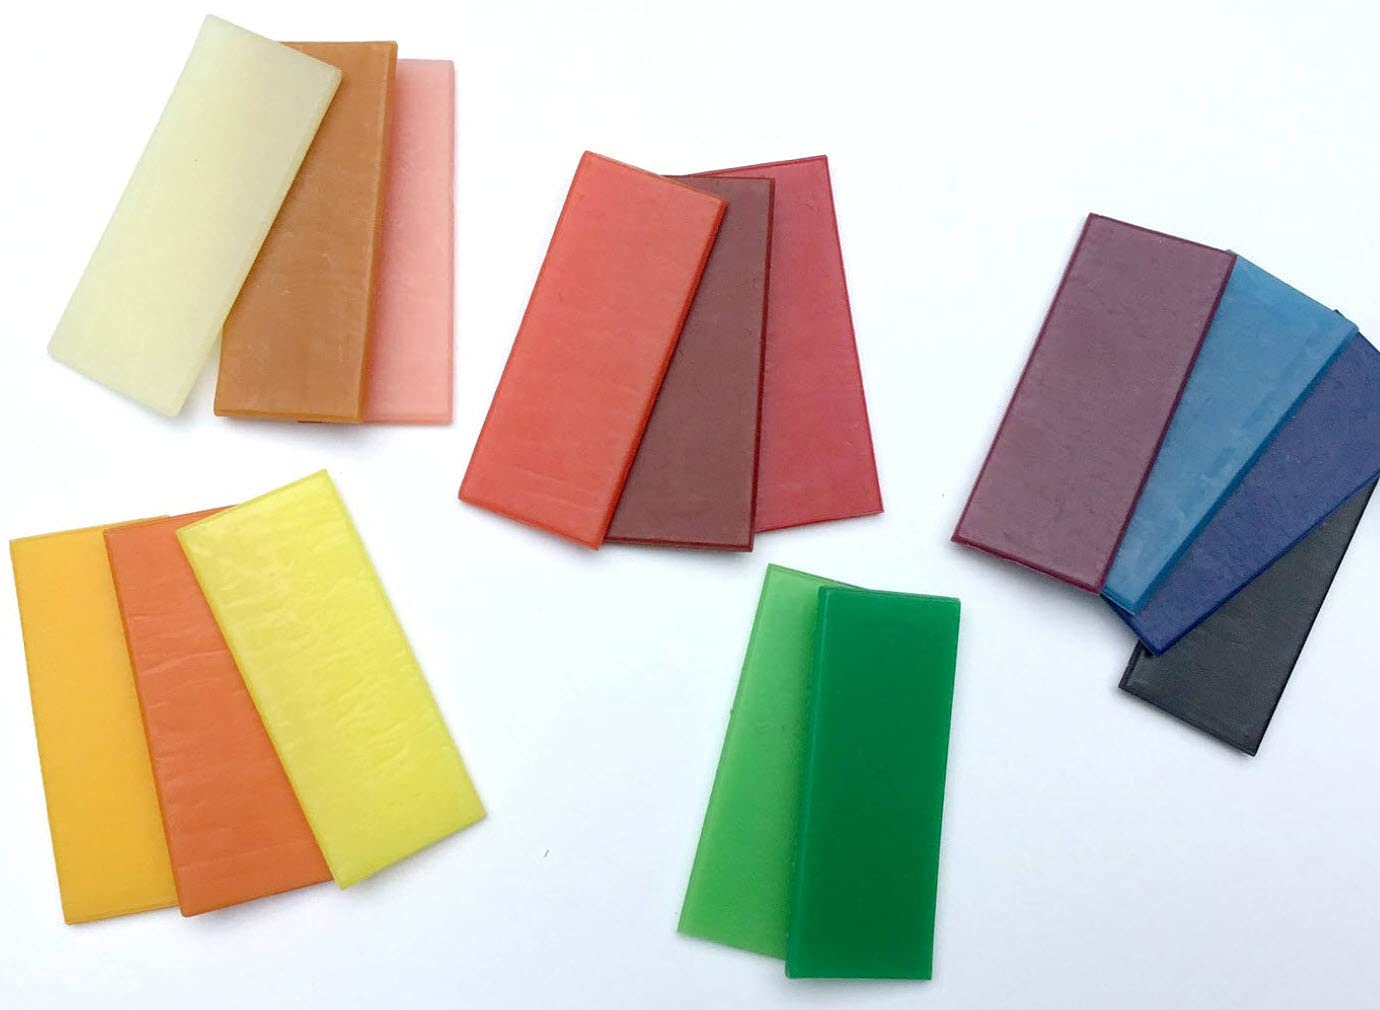 Stockmar Modeling Beeswax Singles - 15 assorted colors